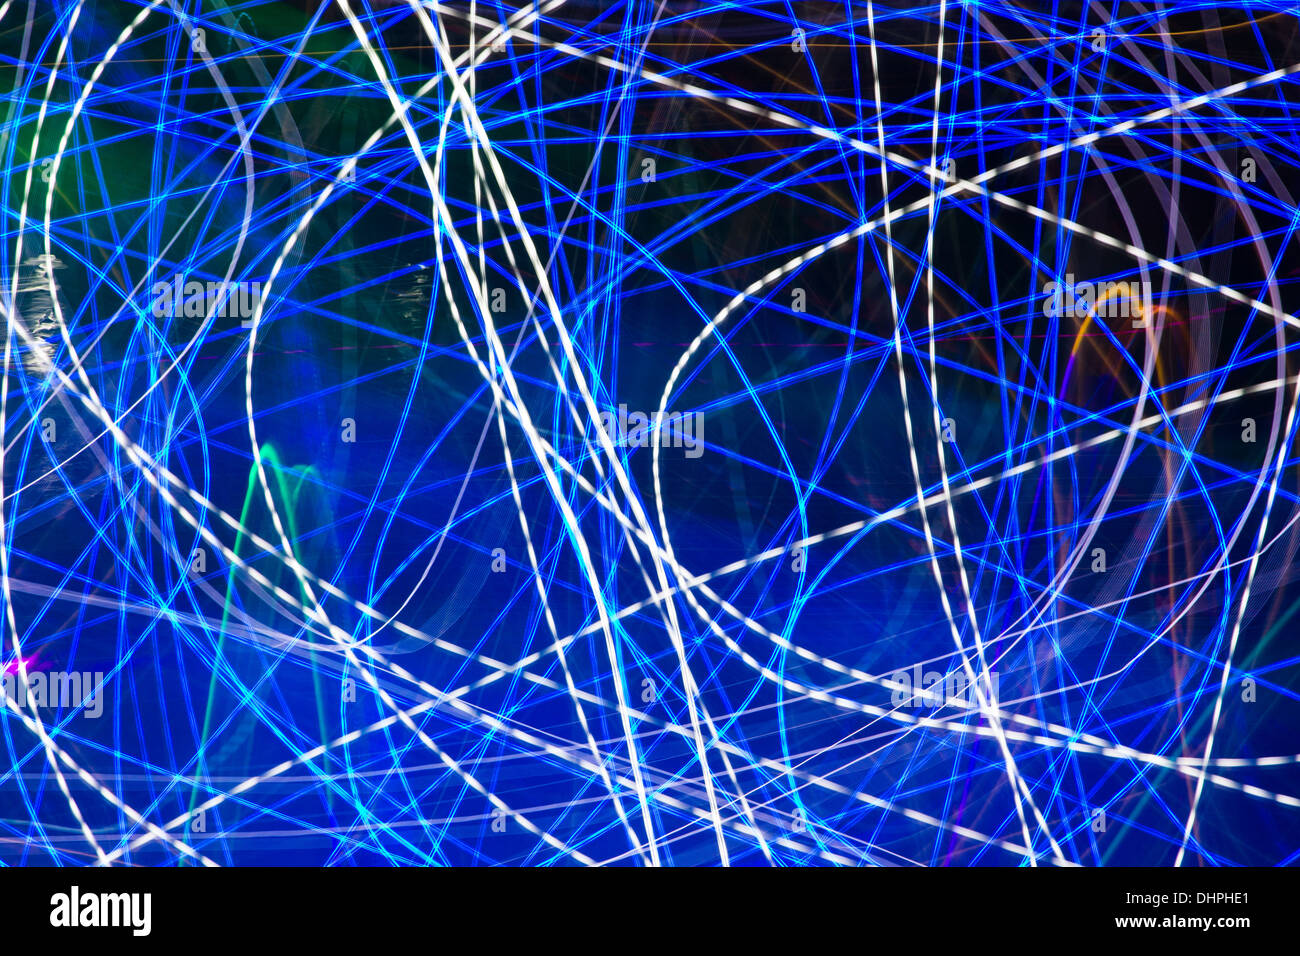 Abstract image of colored lights with movement Stock Photo